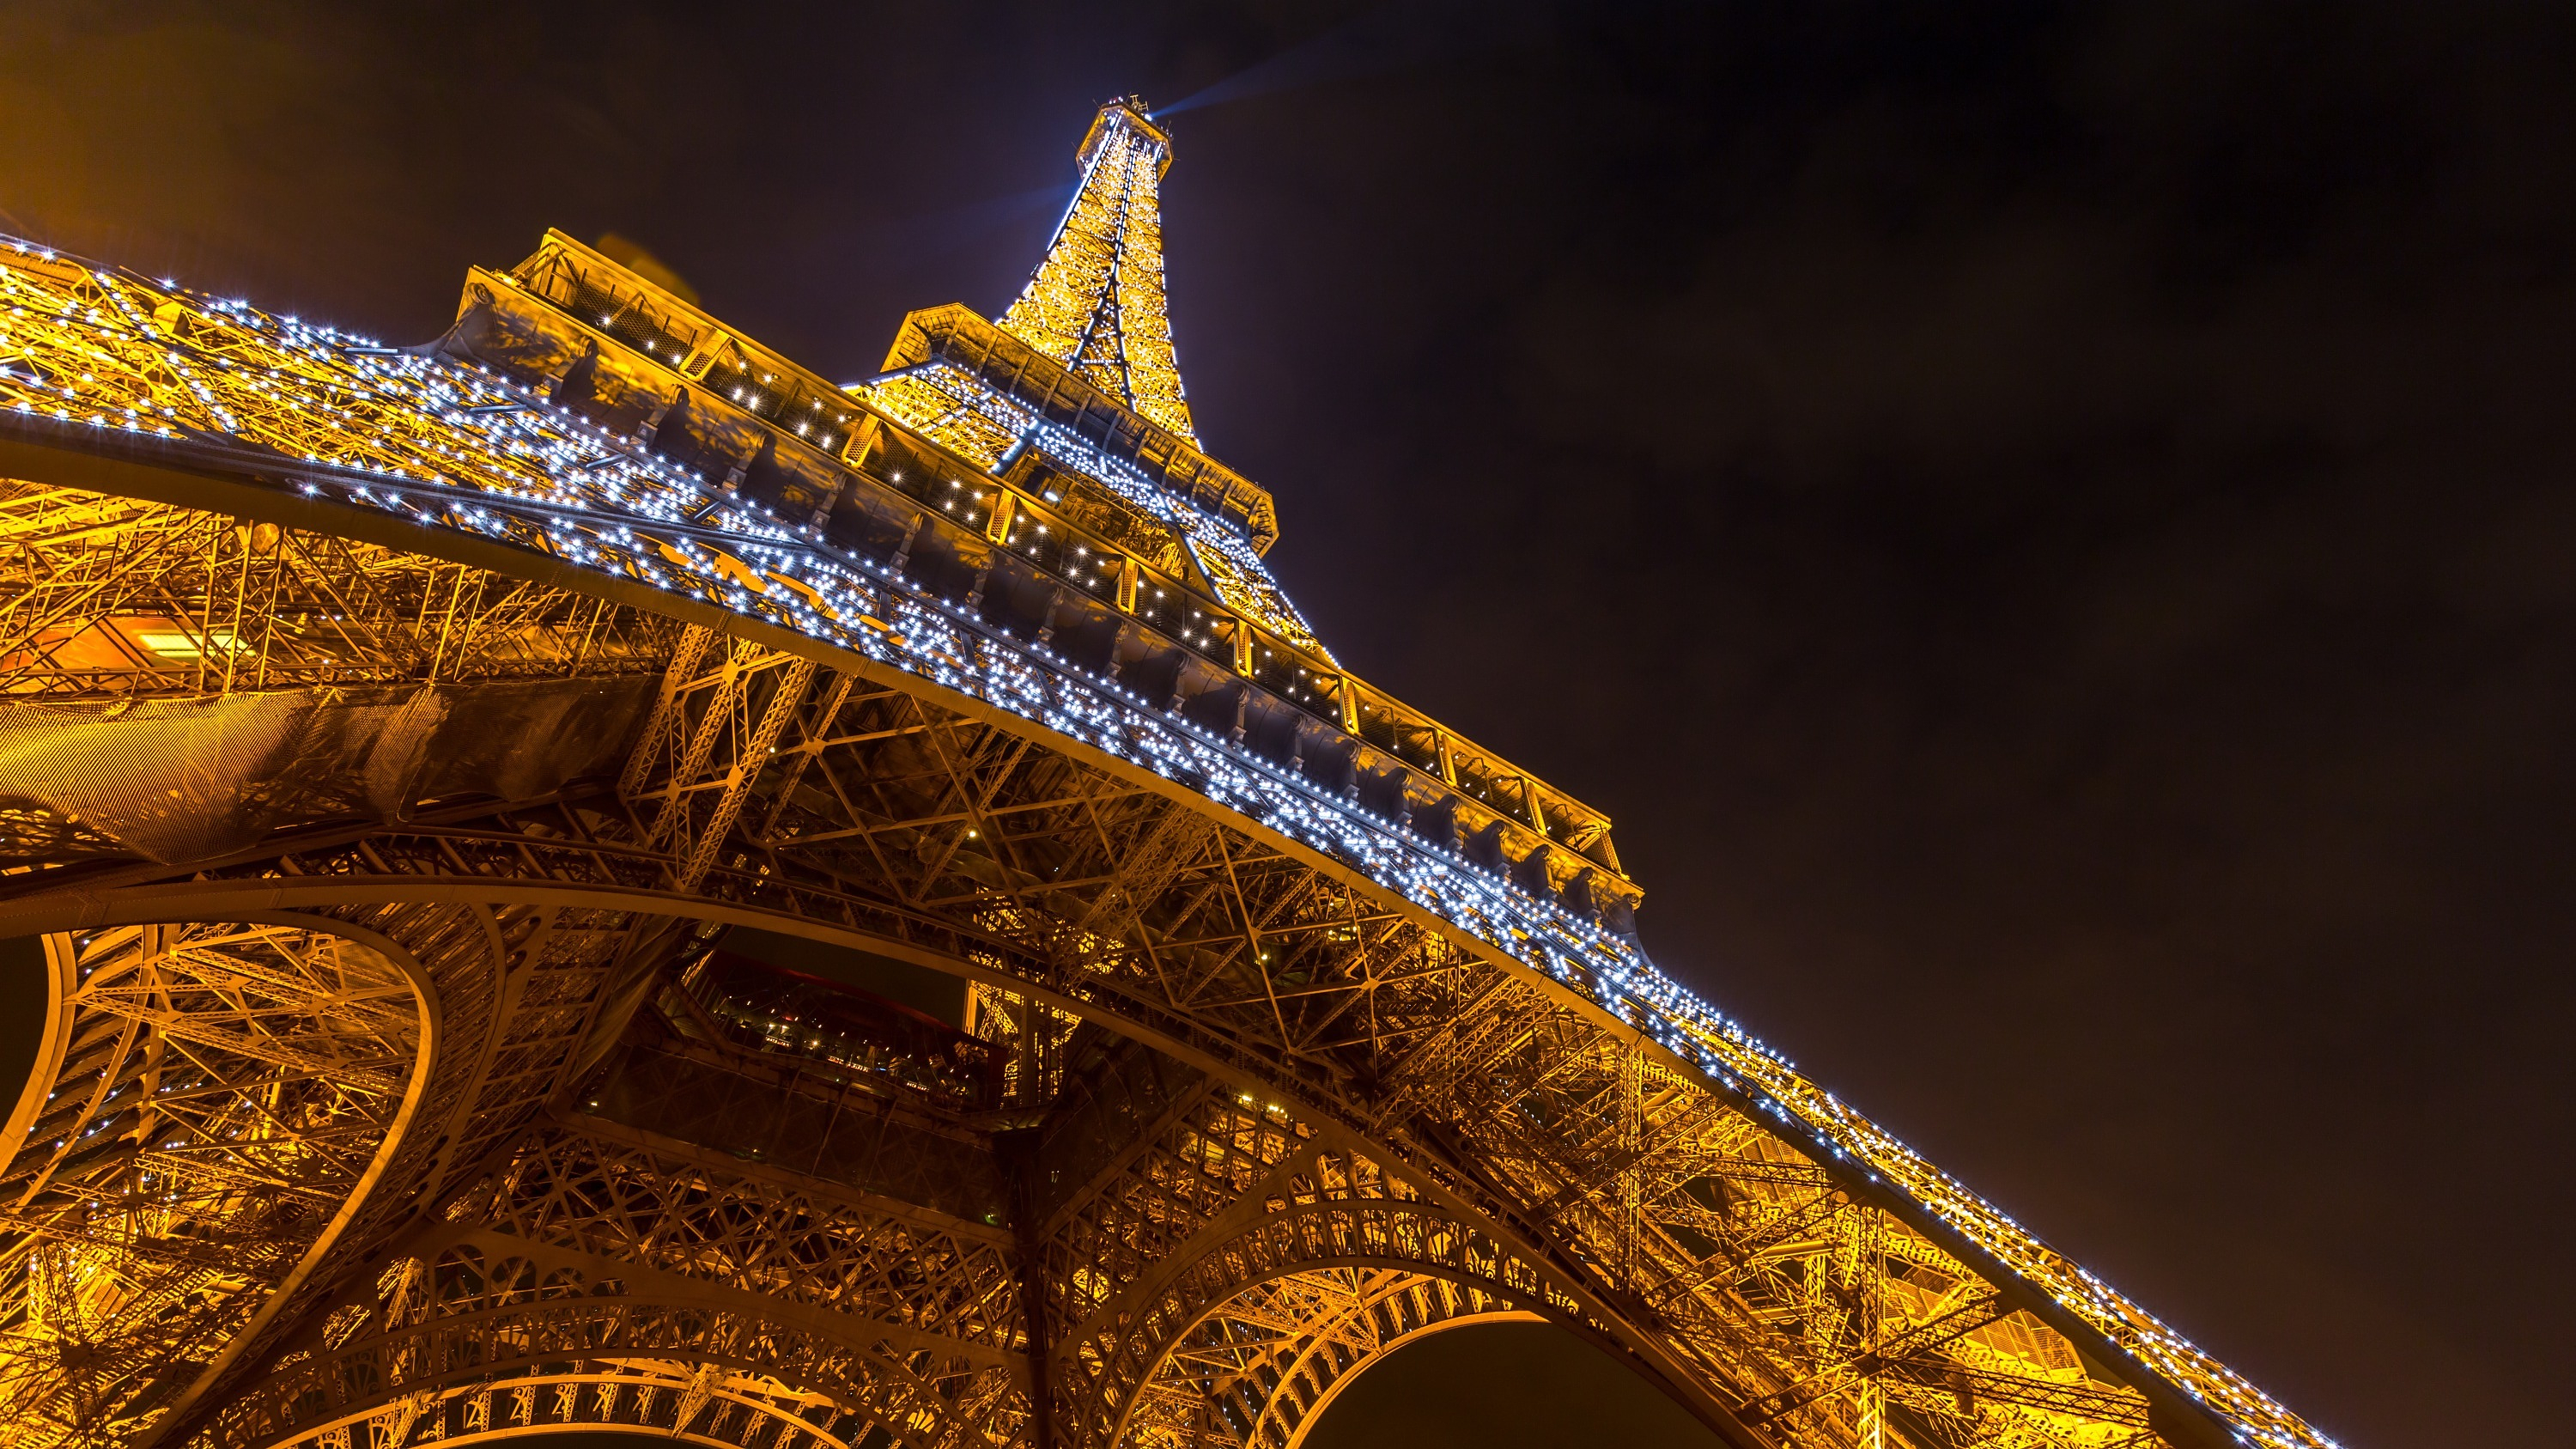 “I saw my life go by”: three employees working on the Eiffel Tower stuck in the middle of the night in an elevator